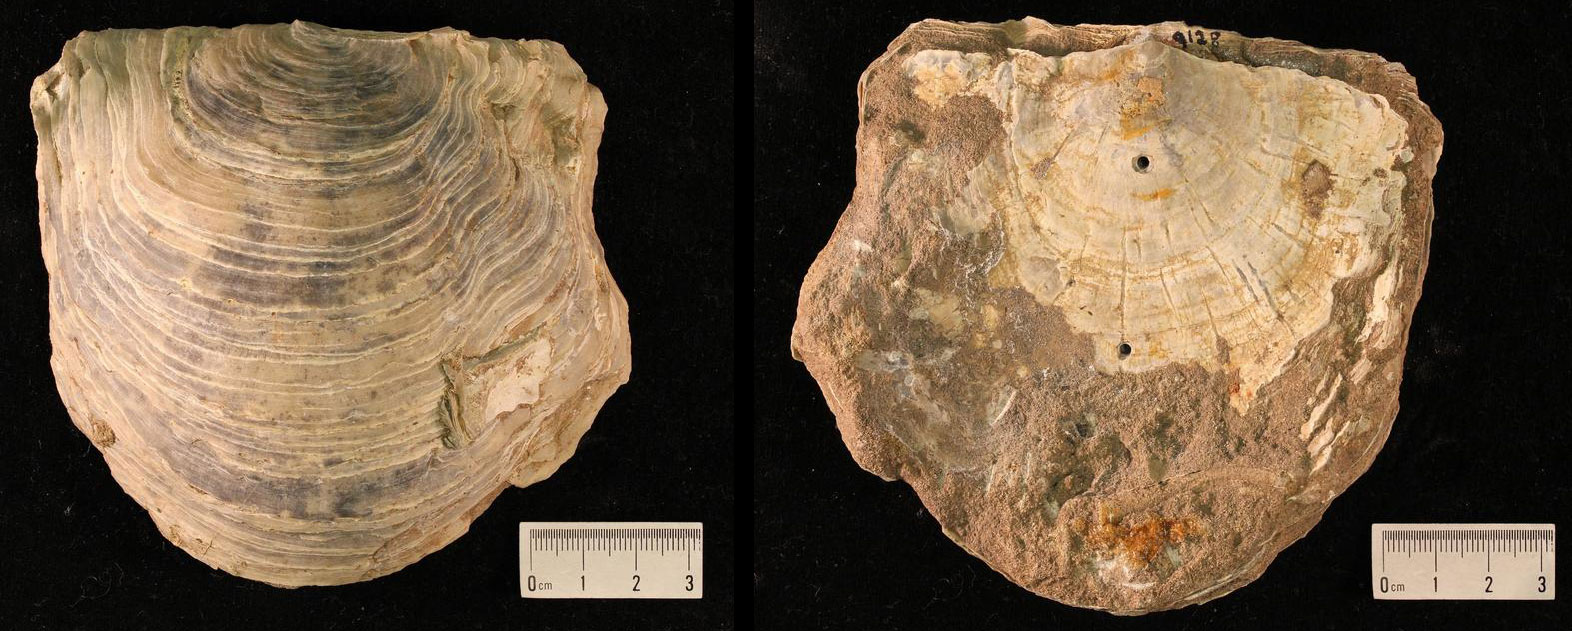 2-photo figure of the Cretaceous oyster Gryphaea vascicularis from Arkansas. Photos show top and bottom of outer parks of the shell.